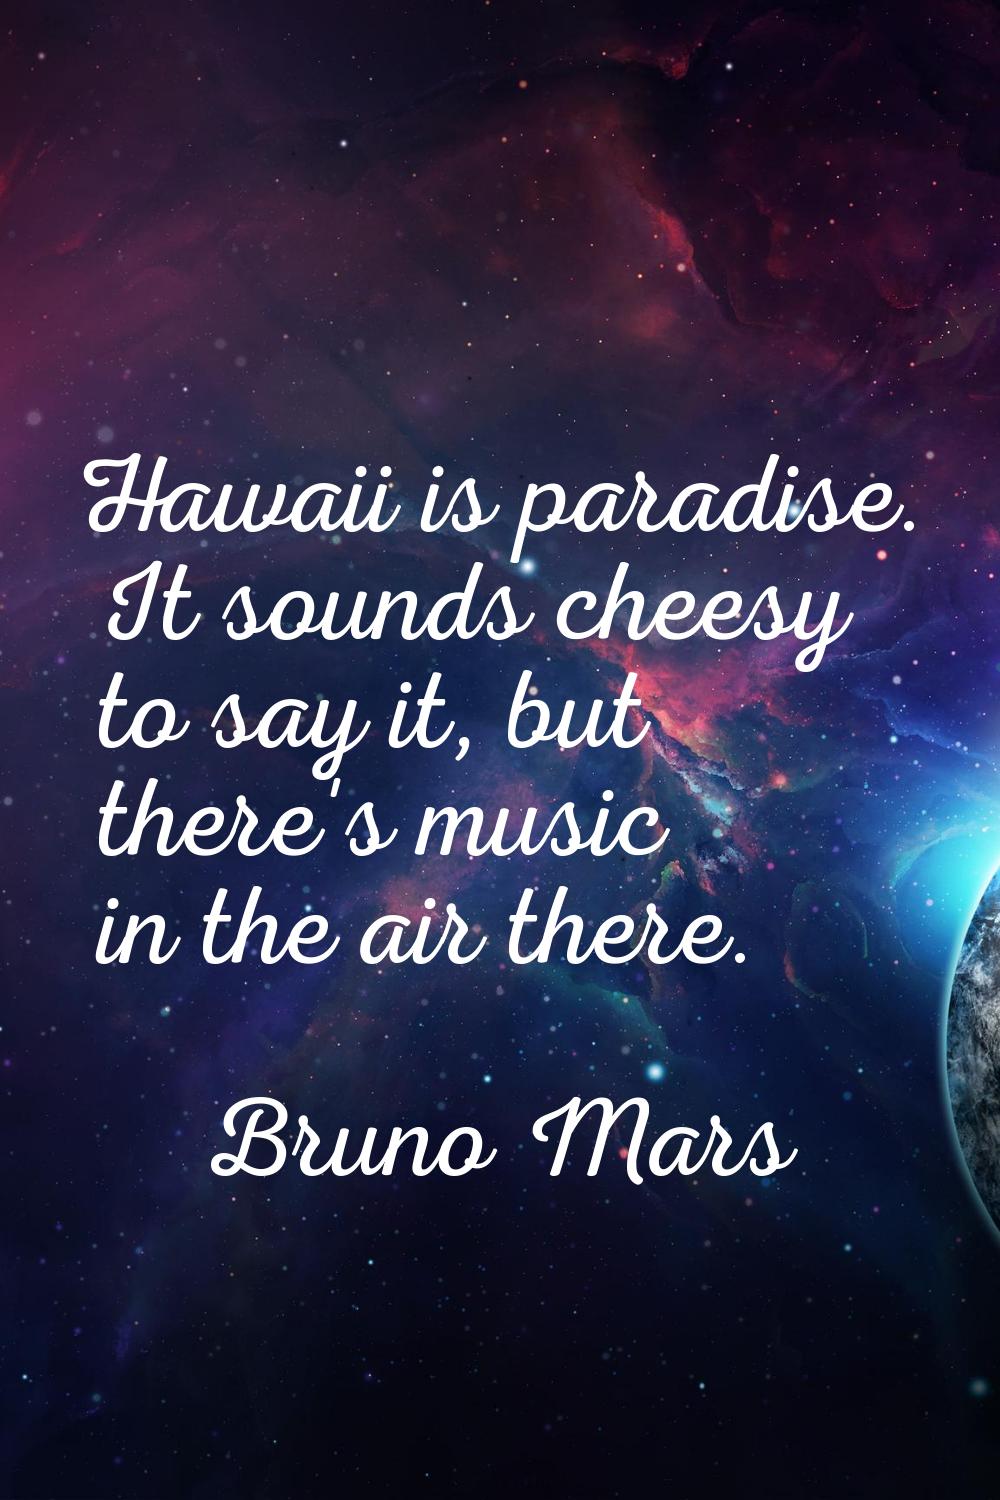 Hawaii is paradise. It sounds cheesy to say it, but there's music in the air there.